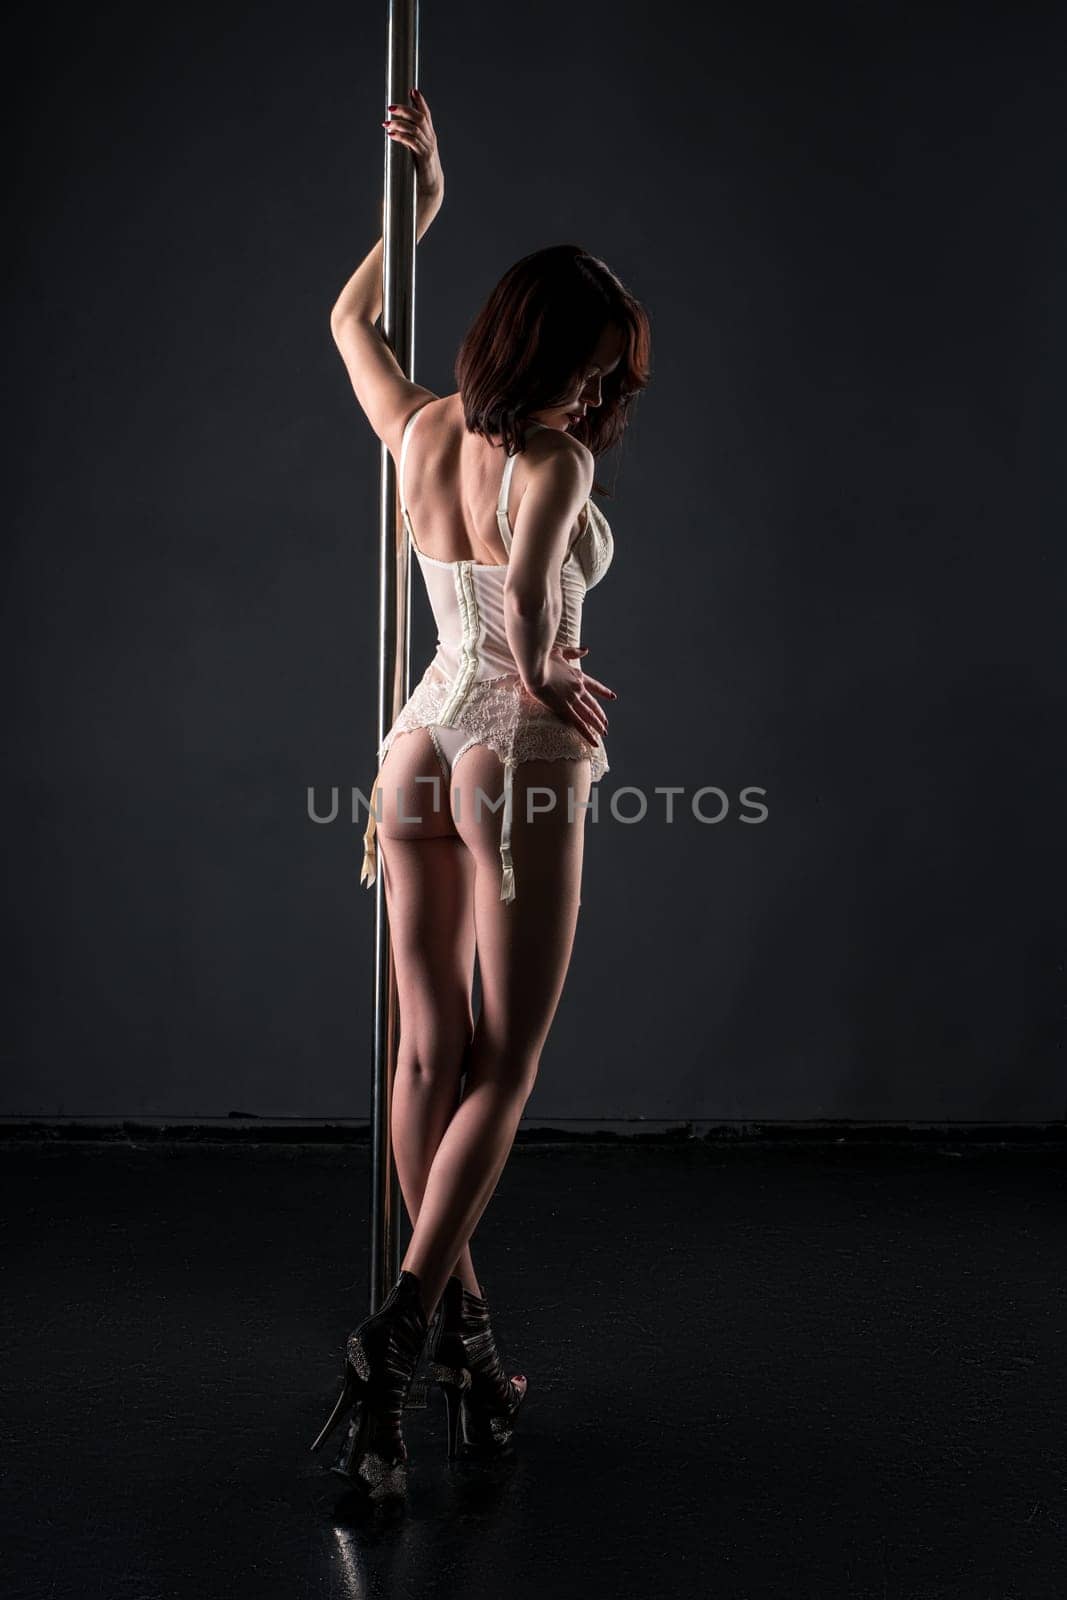 Rear view of dancer on the pole posing in sexy lingerie